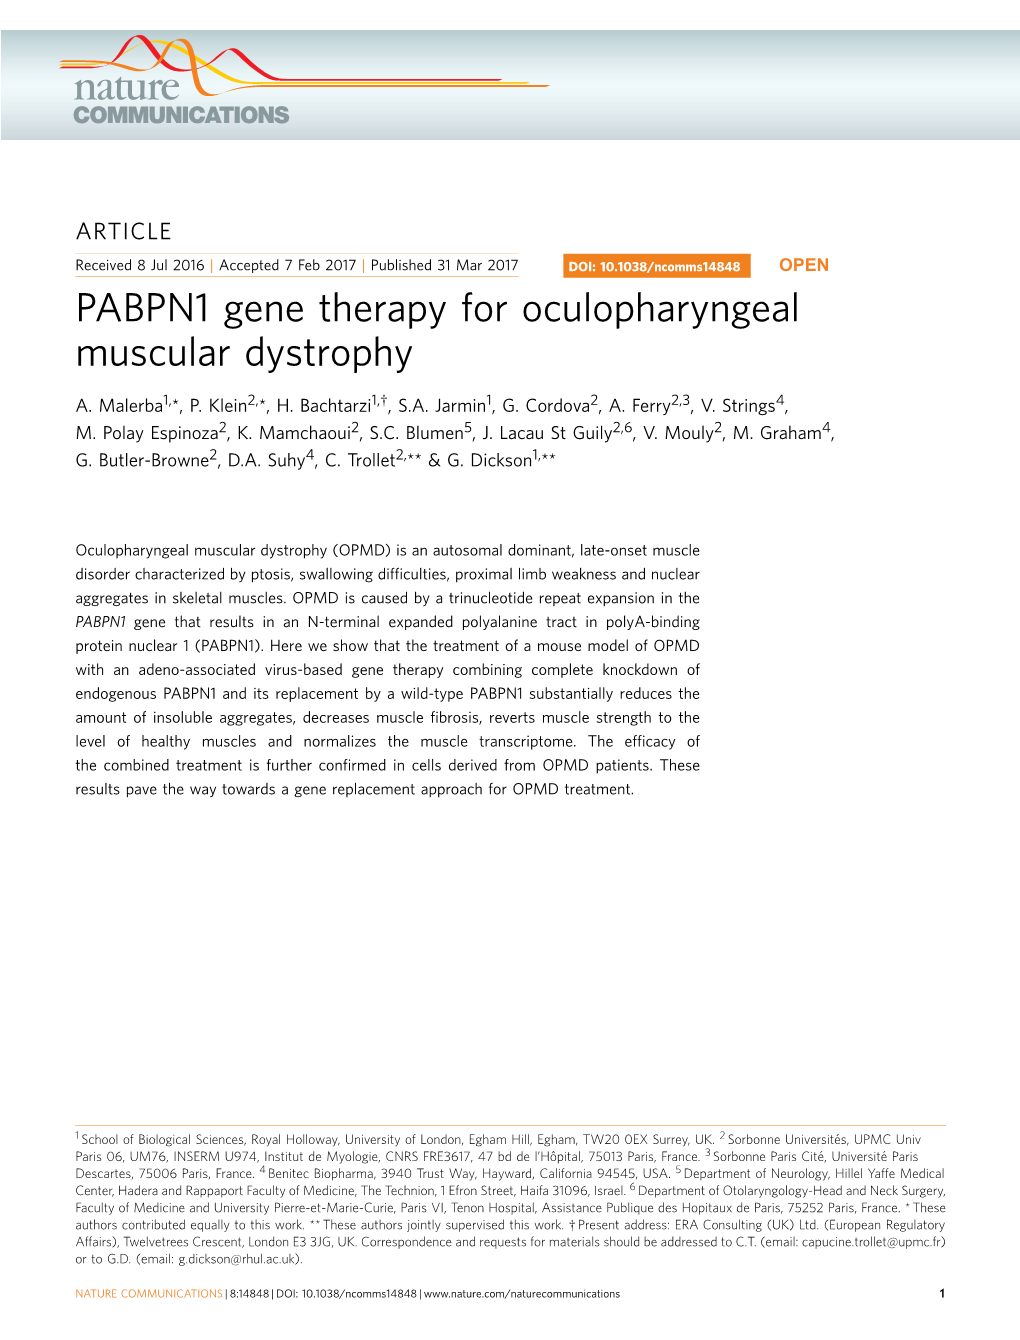 PABPN1 Gene Therapy for Oculopharyngeal Muscular Dystrophy